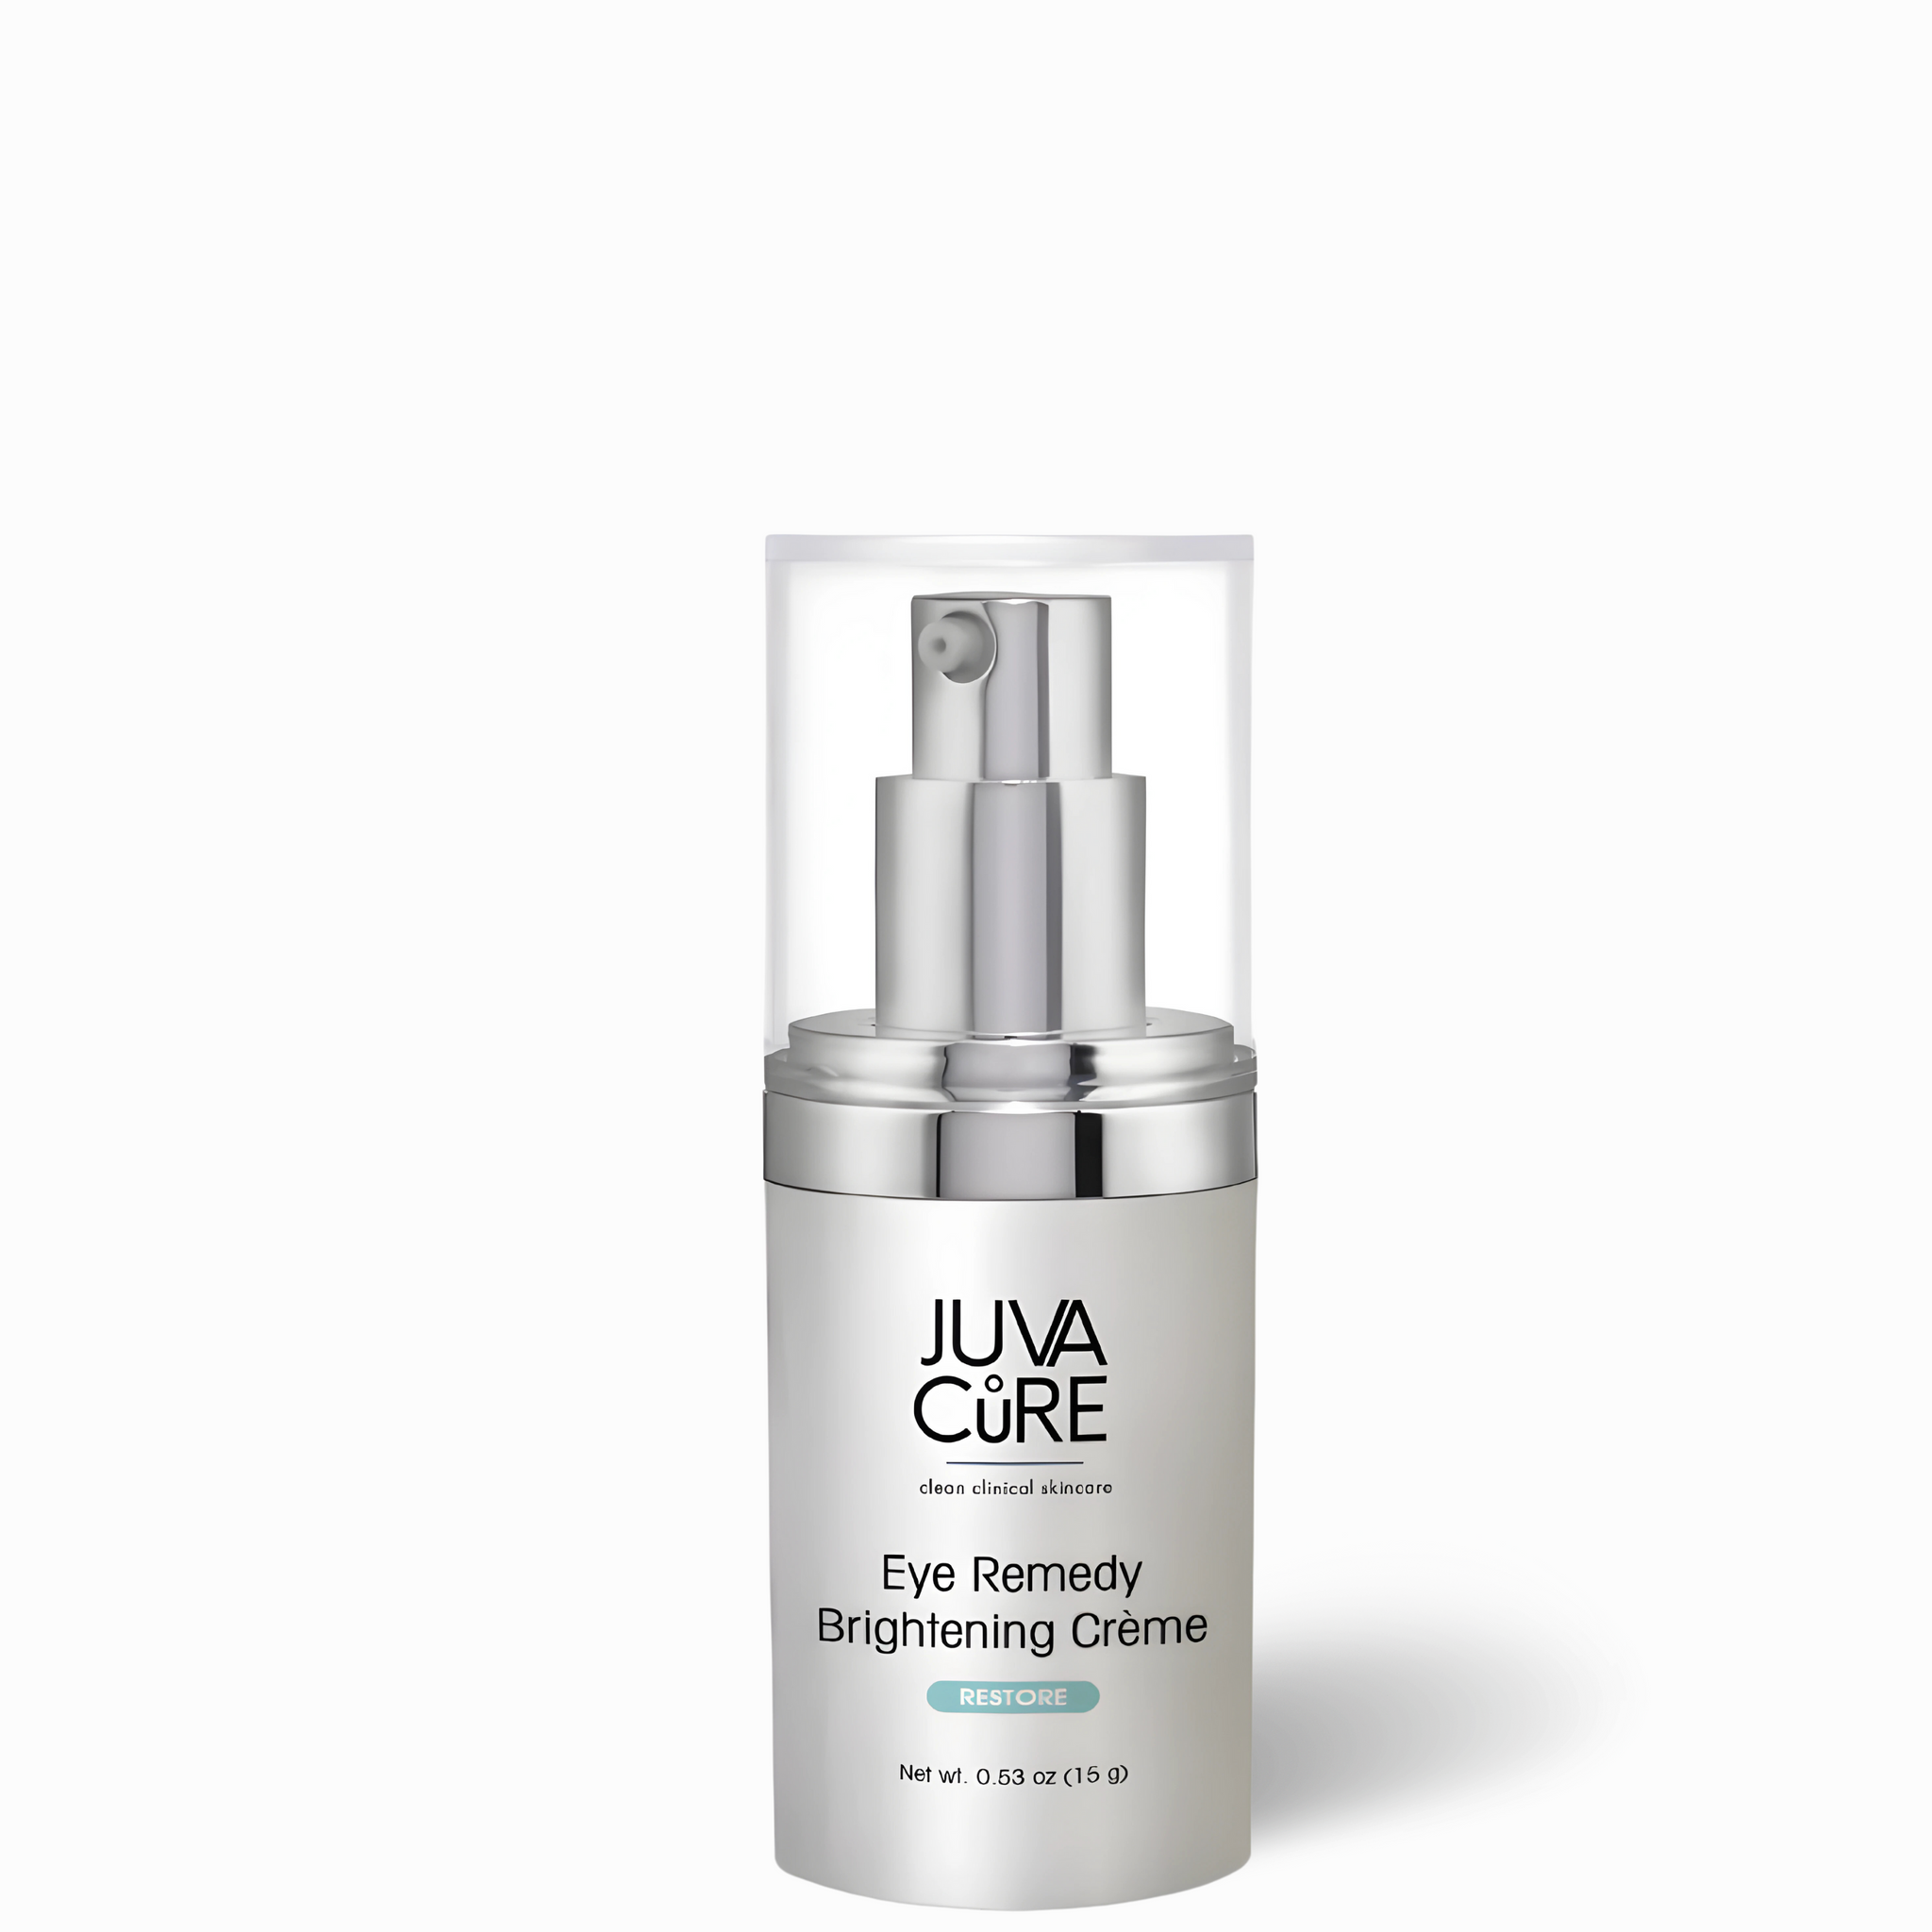 JuvaCure Eye Remedy Brightening Crème